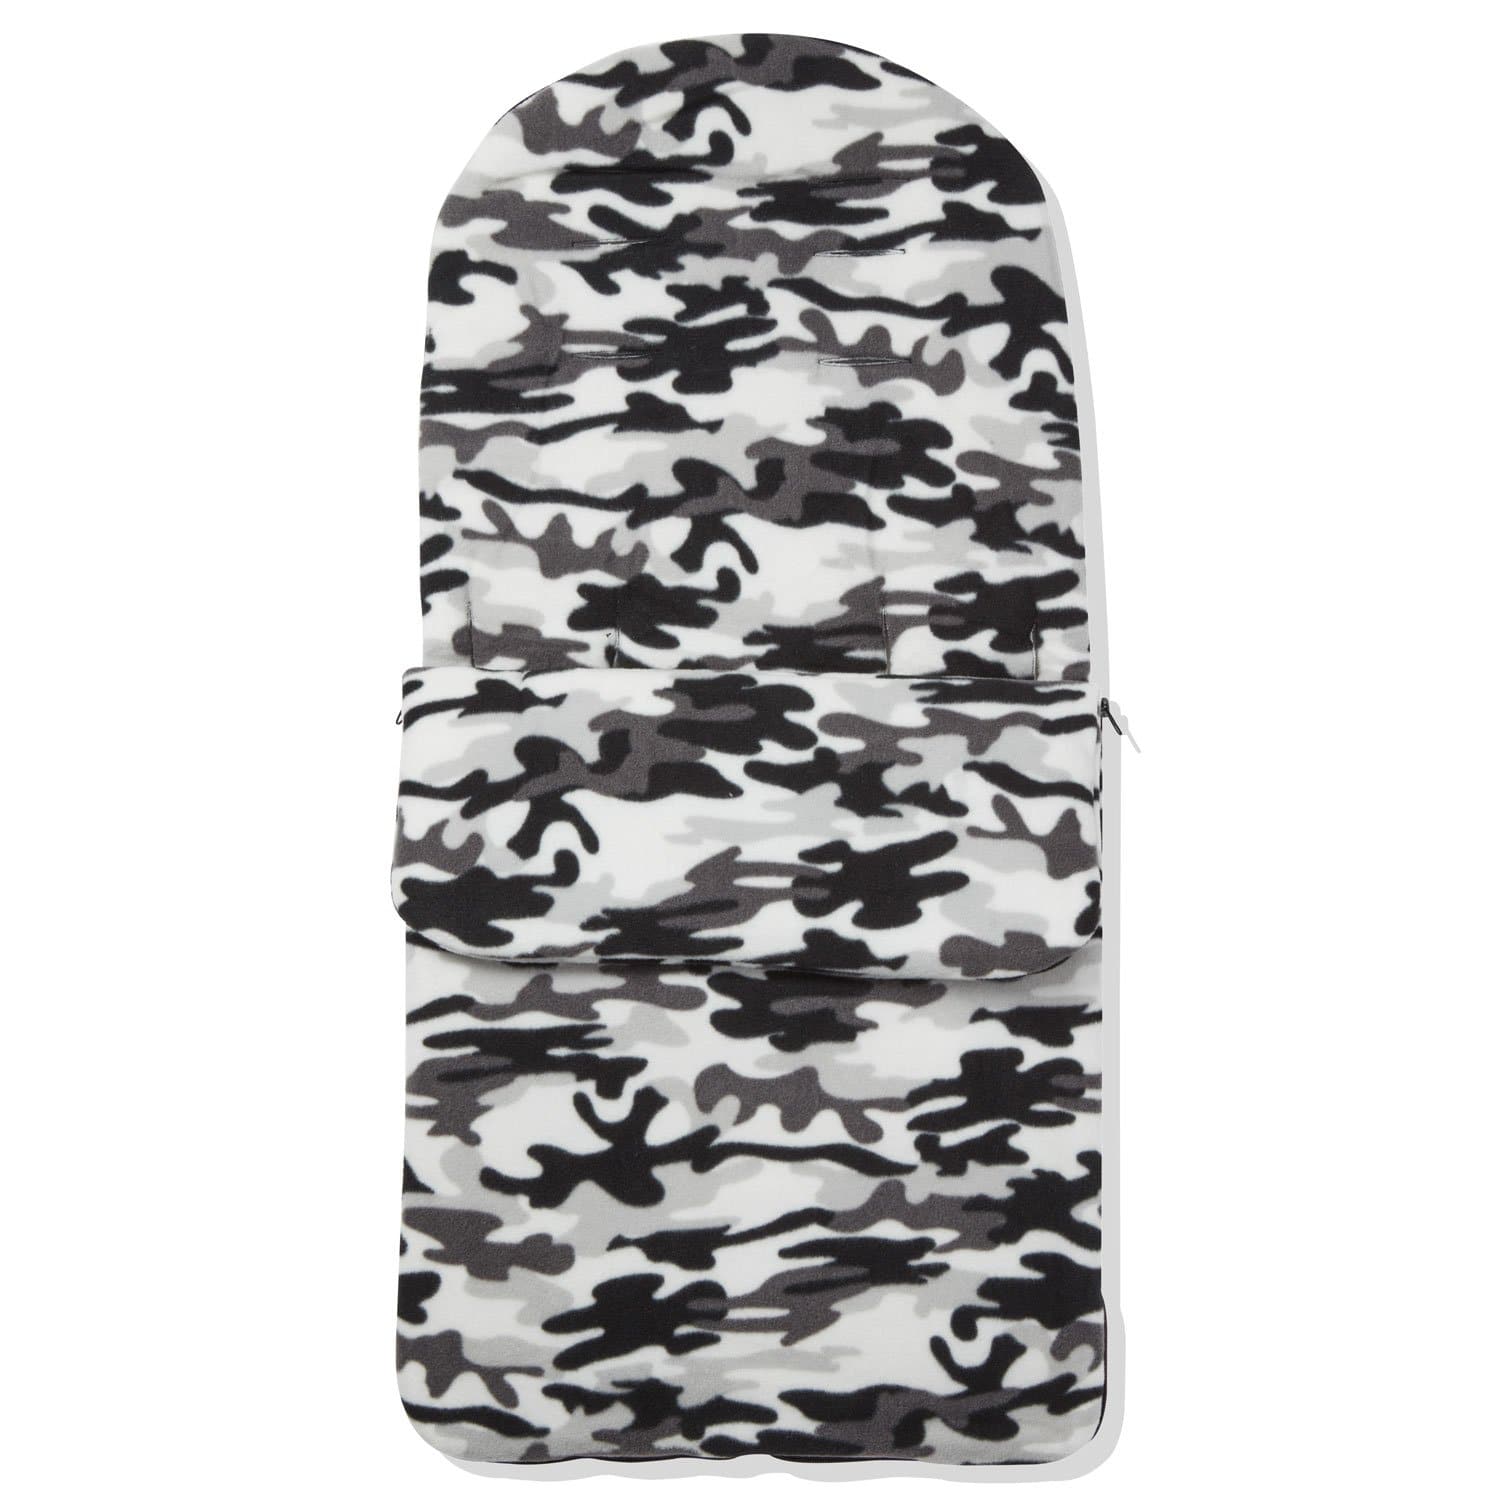 Universal Fleece Pushchair Footmuff / Cosy Toes - Fits All Pushchairs / Prams And Buggies Grey Camouflage Fits All Models 